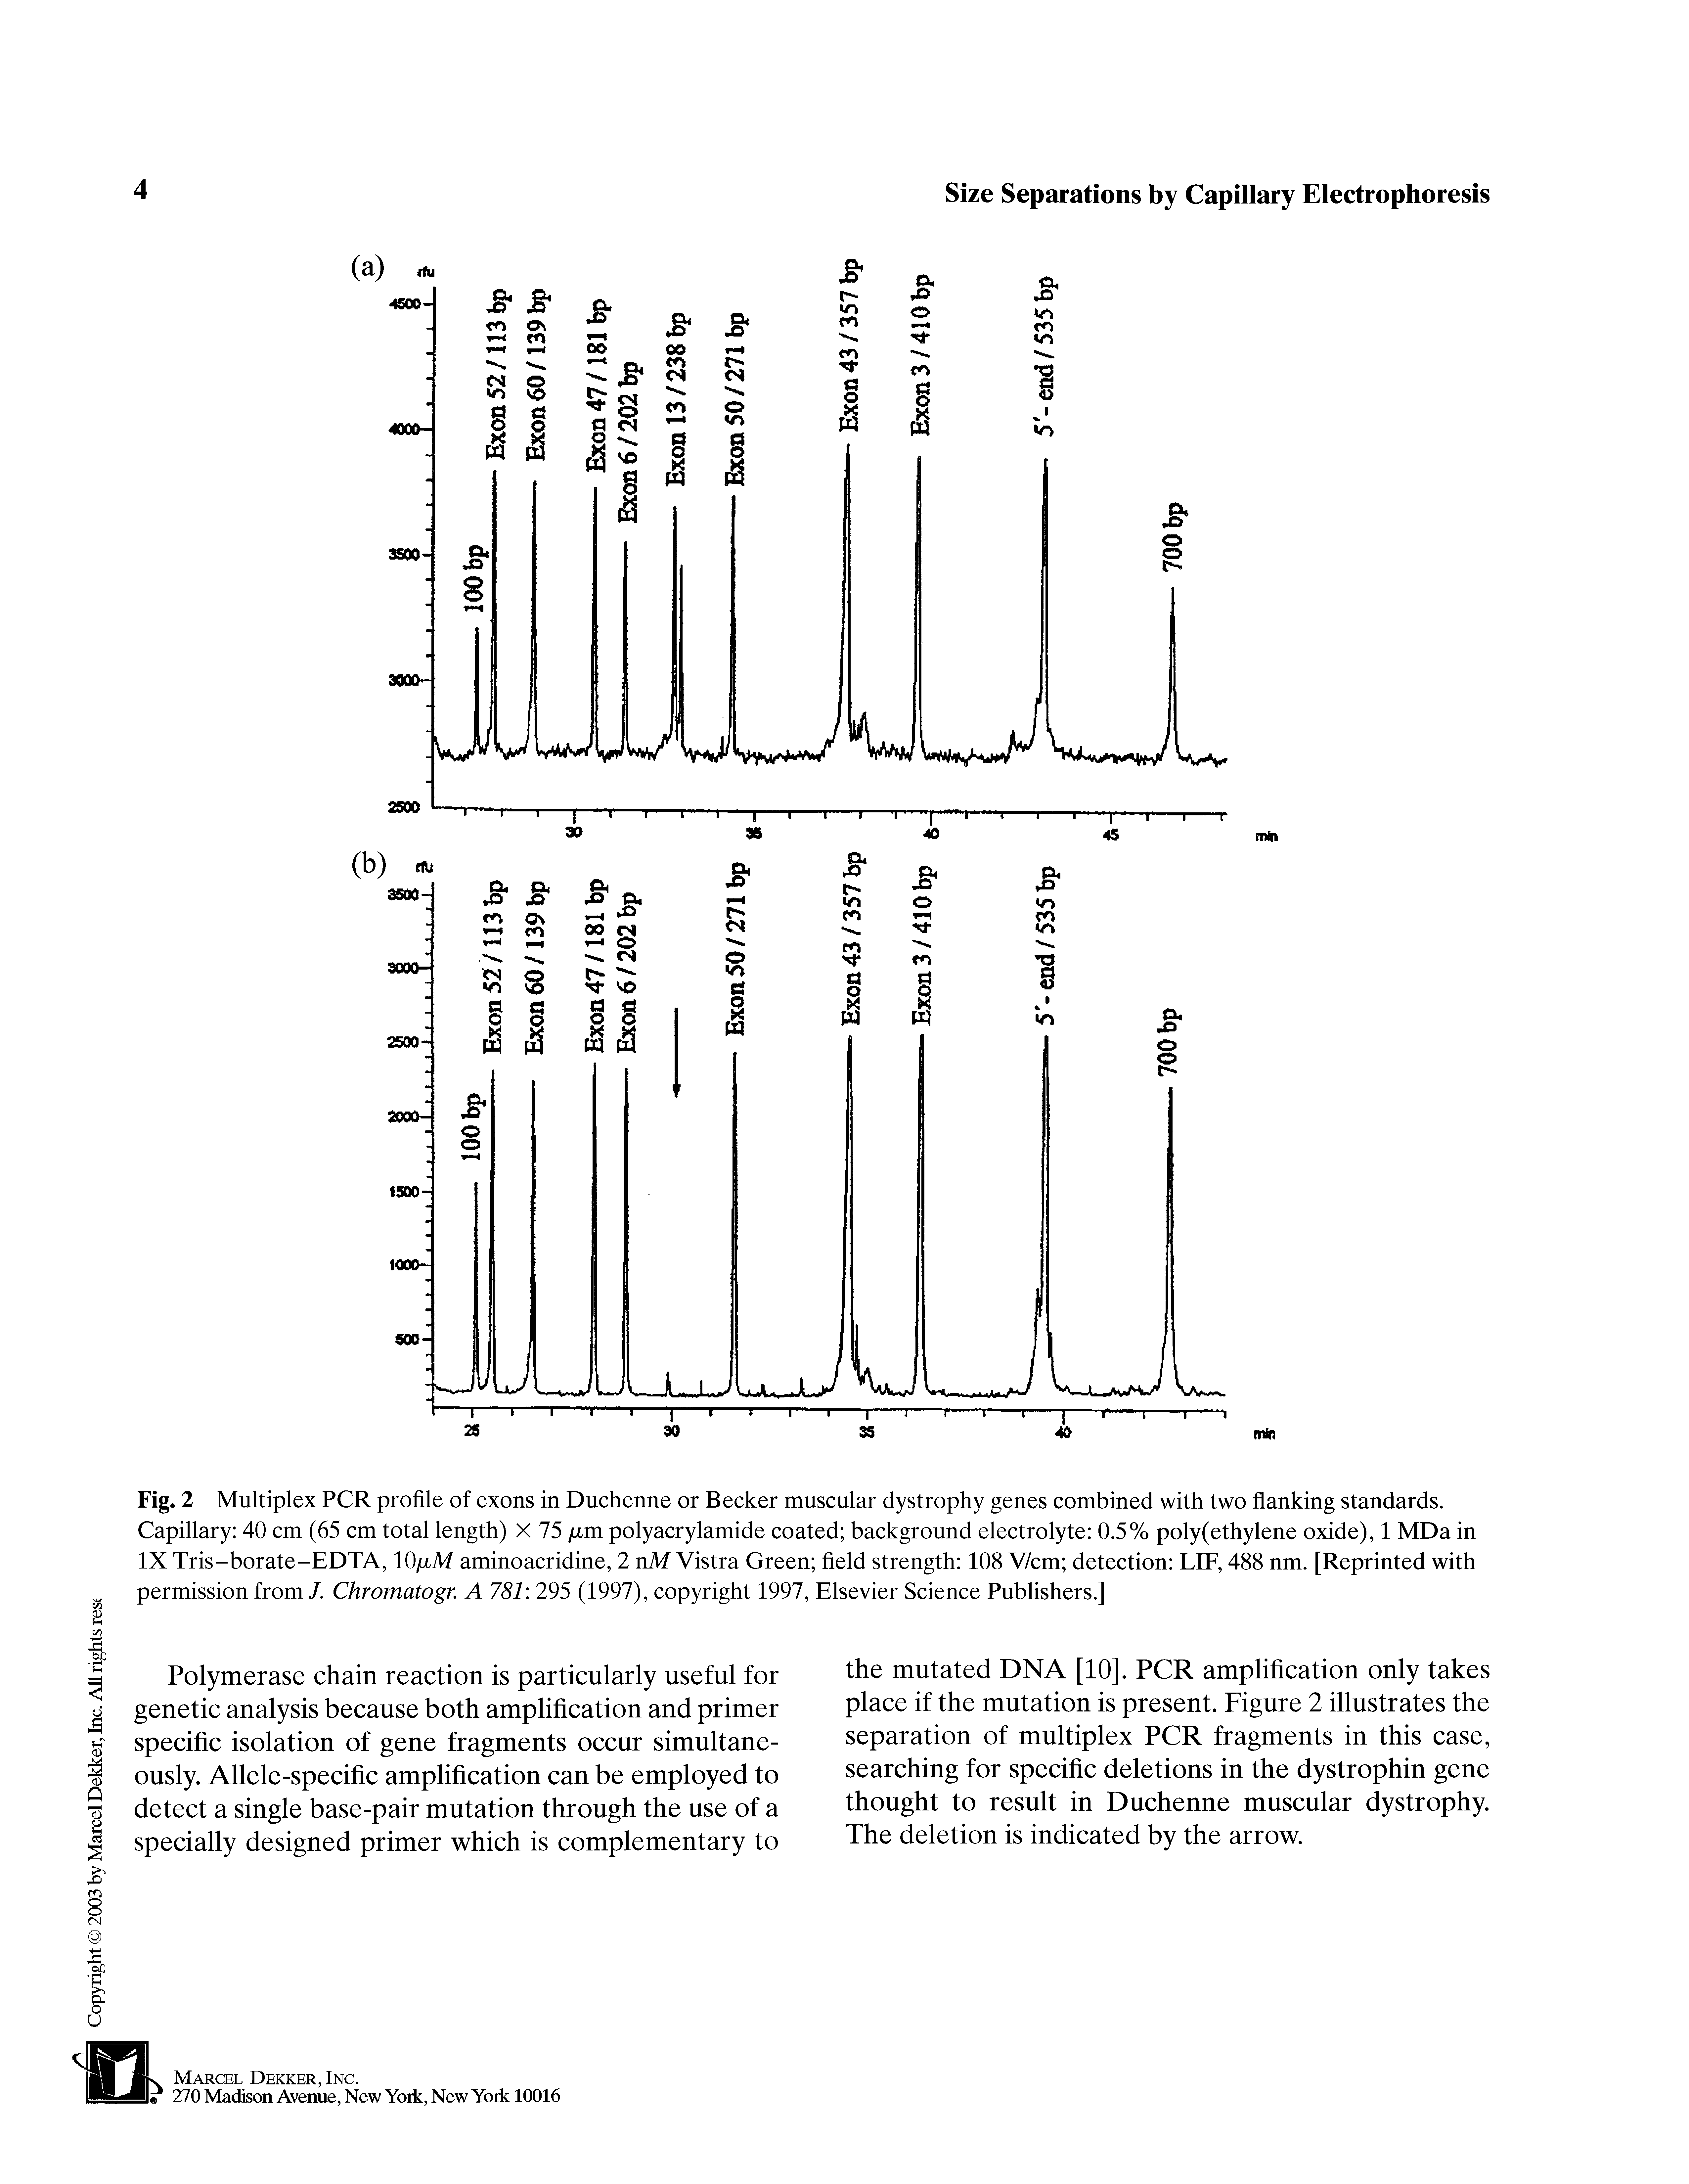 Fig. 2 Multiplex PCR profile of exons in Duchenne or Becker muscular dystrophy genes combined with two flanking standards. Capillary 40 cm (65 cm total length) X 75 tm polyacrylamide coated background electrolyte 0.5% poly(ethylene oxide), 1 MDa in IX Tris-borate-EDTA, lO tM aminoacridine, 2 nM Vistra Green field strength 108 V/cm detection LIF, 488 nm. [Reprinted with permission from/. Chromatogr. A 781 295 (1997), copyright 1997, Elsevier Science Publishers.]...